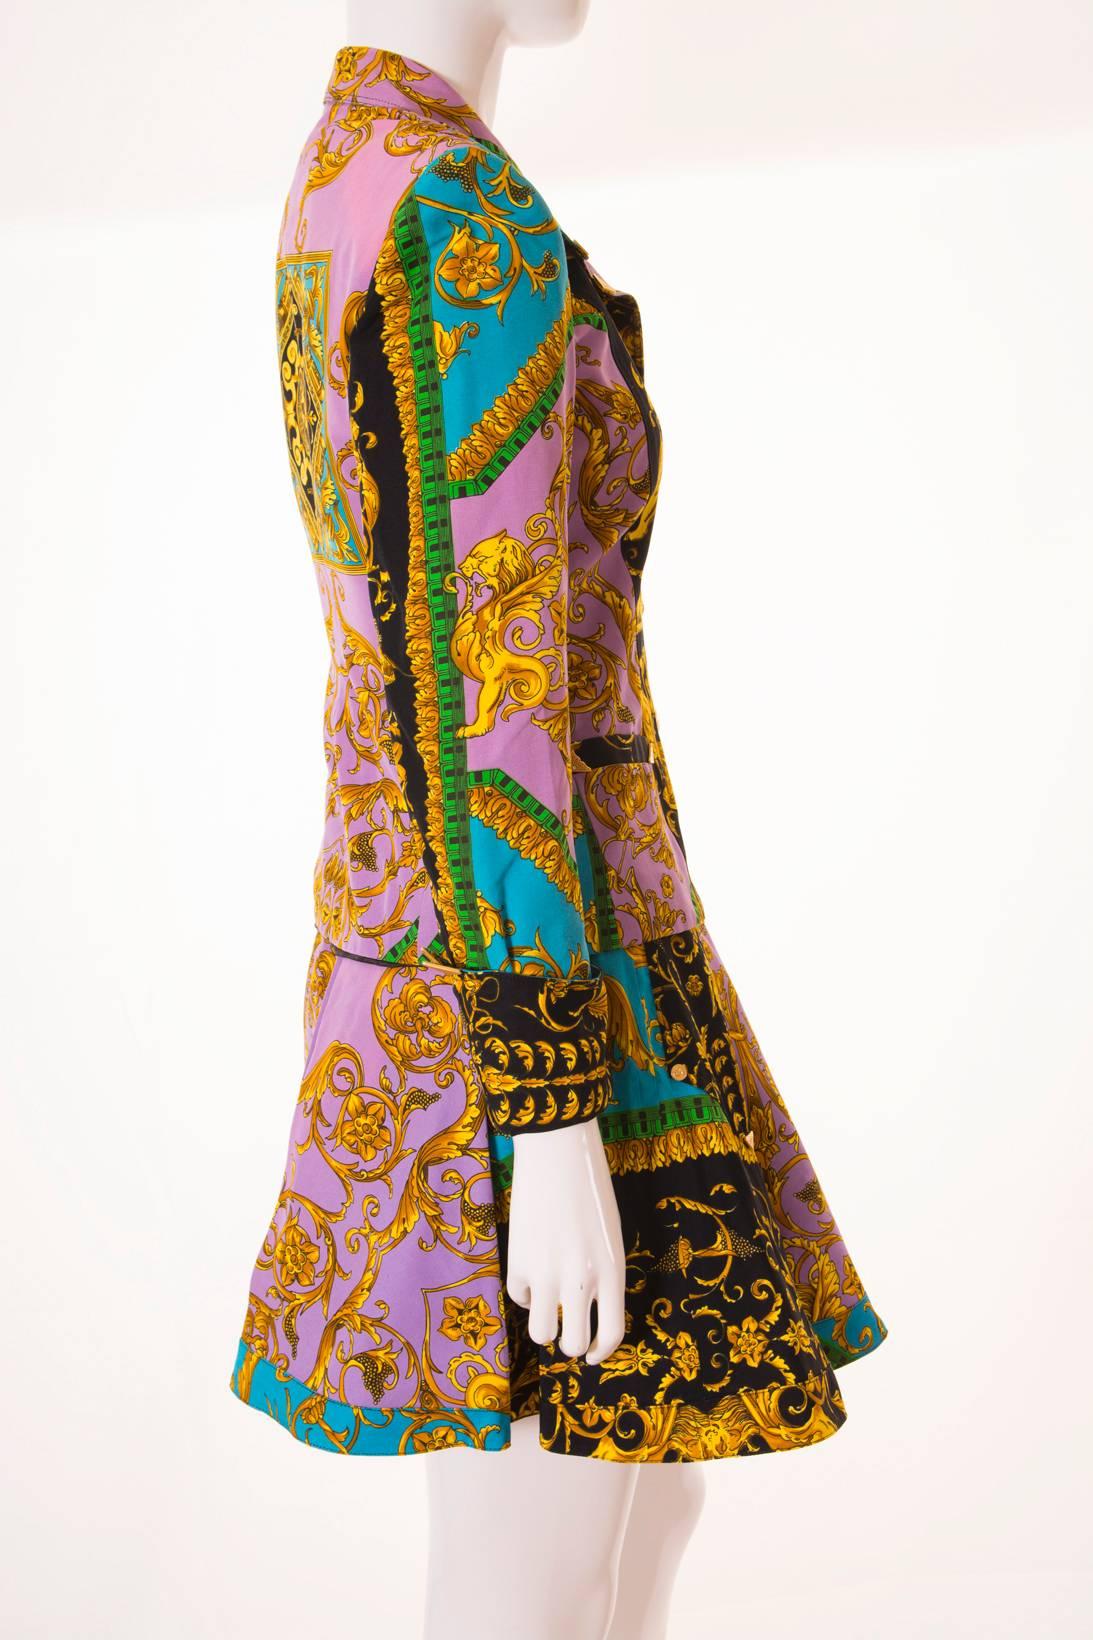 The print on this skirt suit by Versus Versace is truly to die for! This suit has the most intricate Baroque inspired print in lavender, gold and bold turquoise.  There are lions at the front of the jacket, and a lion's head at the back.  Both the